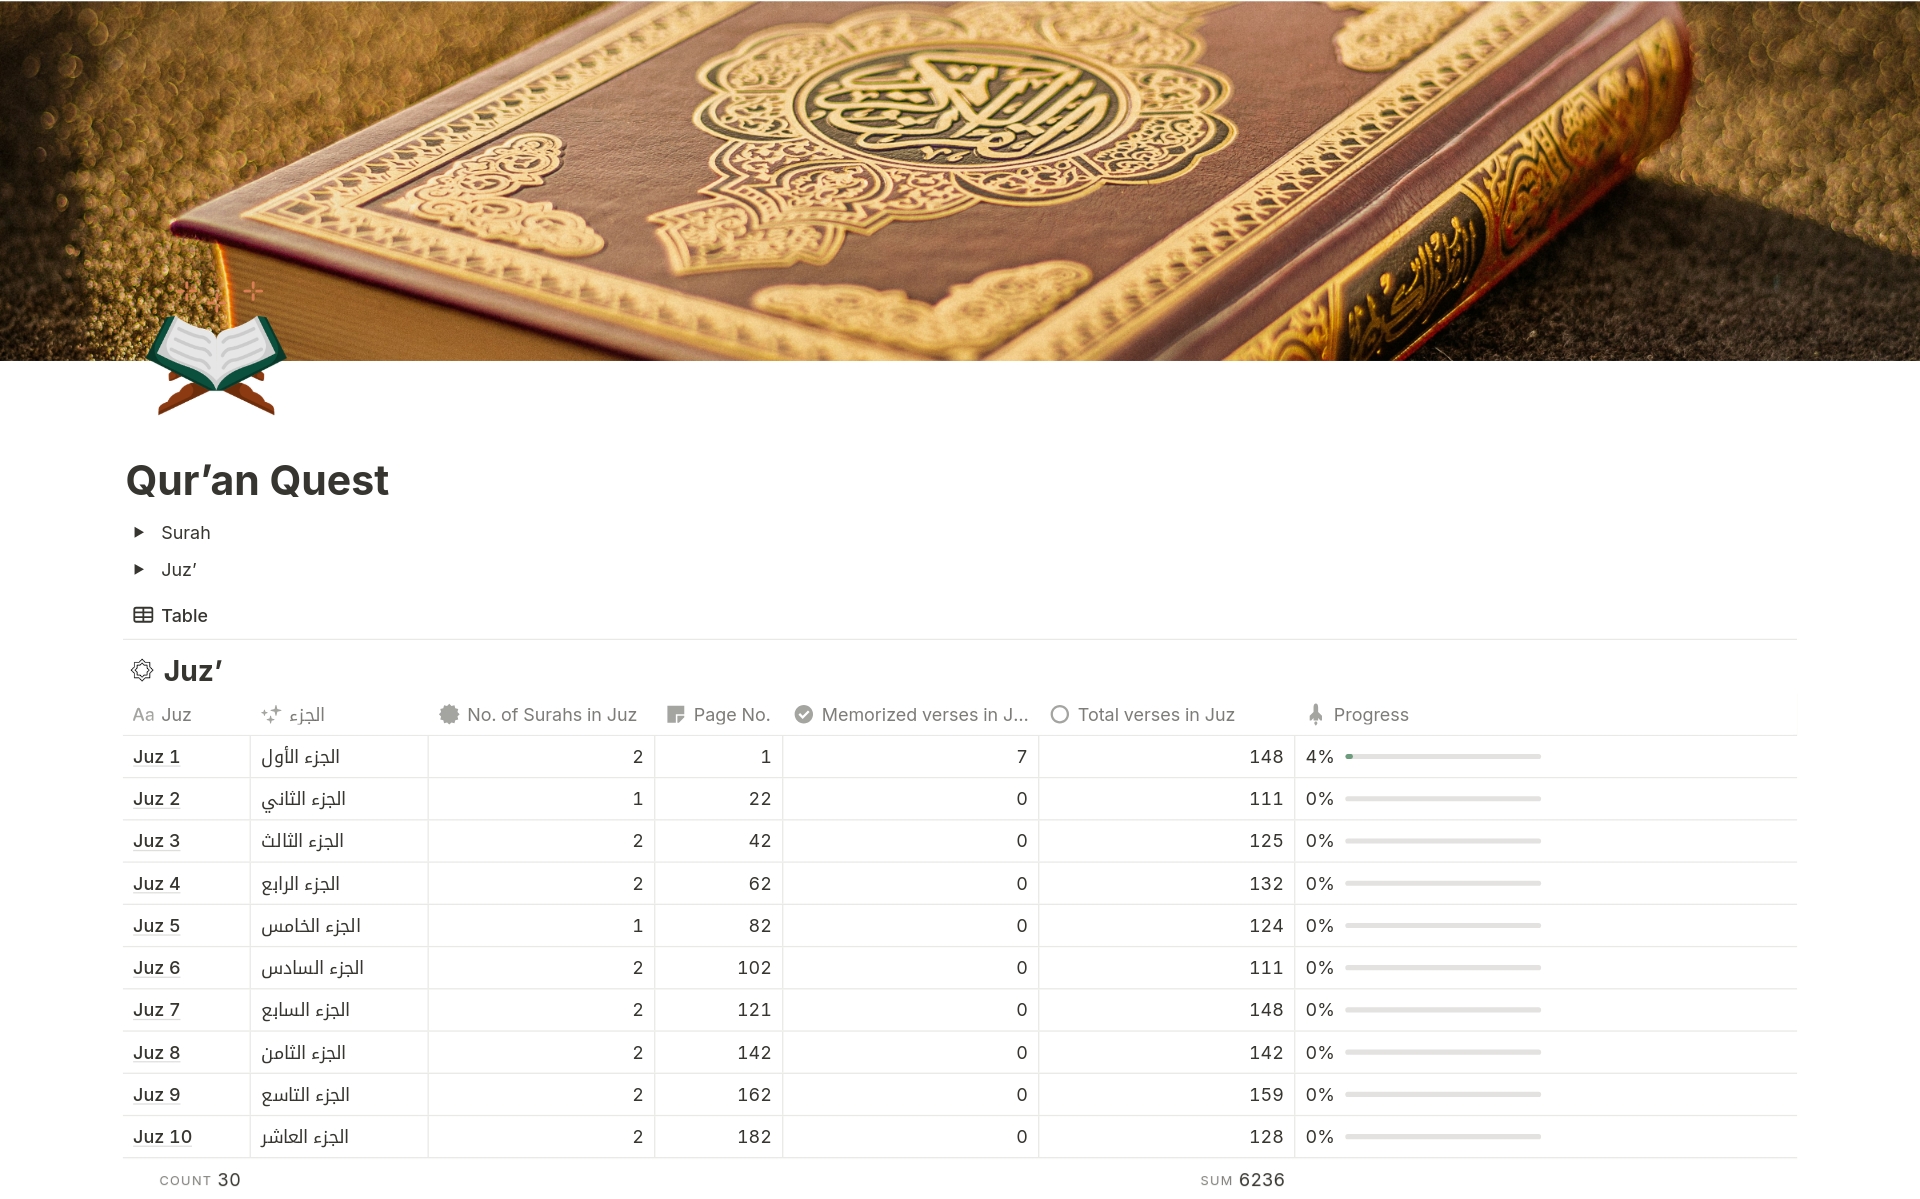 This template offers you a simple but engaging way to track your progress in memorizing the Quran, including your revisions, and deepen your relationship with the Holy Book.

